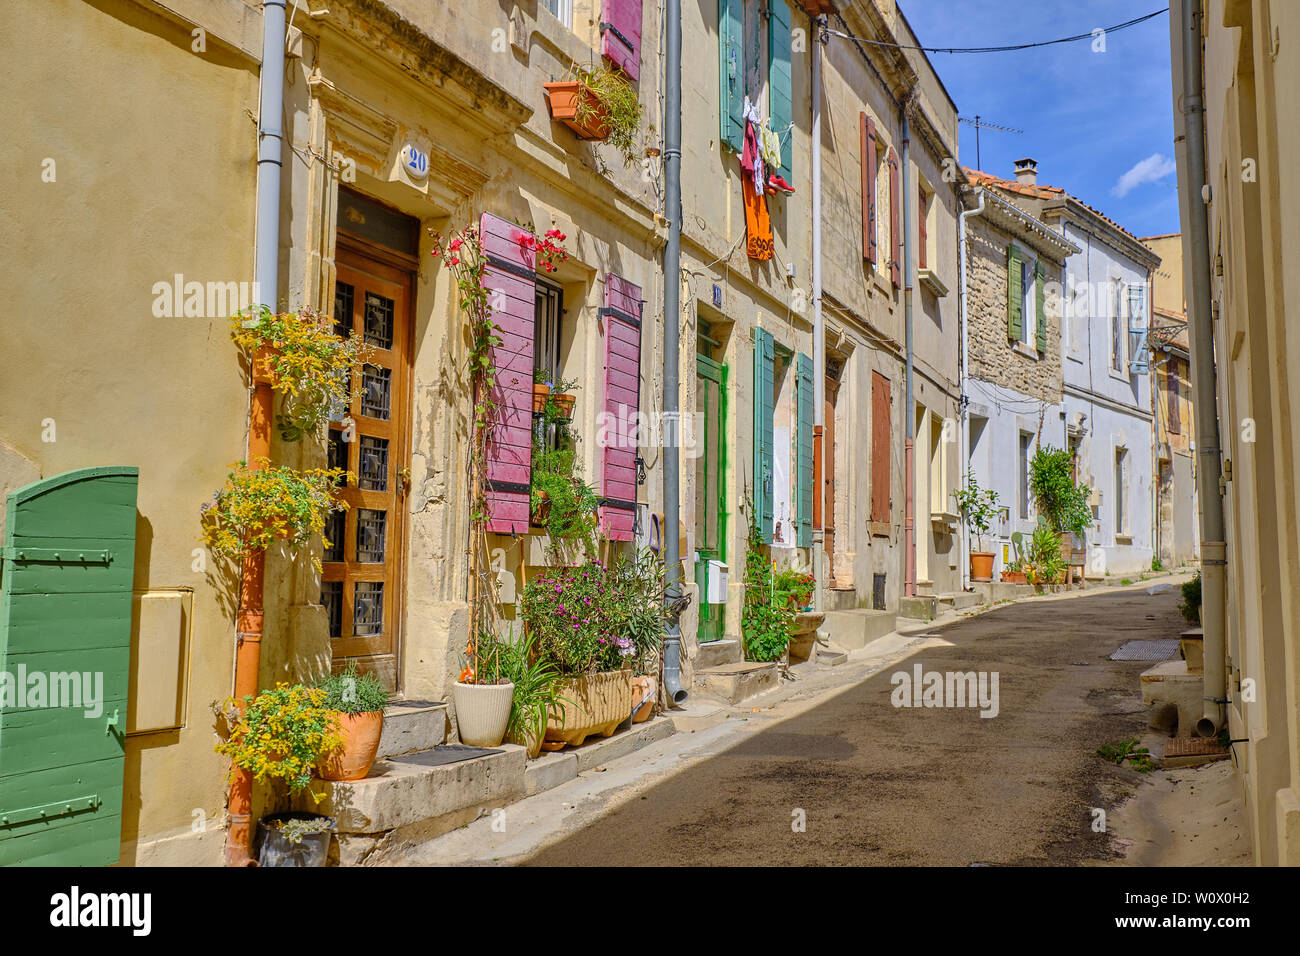 Typical street of the old part of Arles, with colourful shutters and doors, hanging plants and laundry on a sunny day. Arles, France Stock Photo